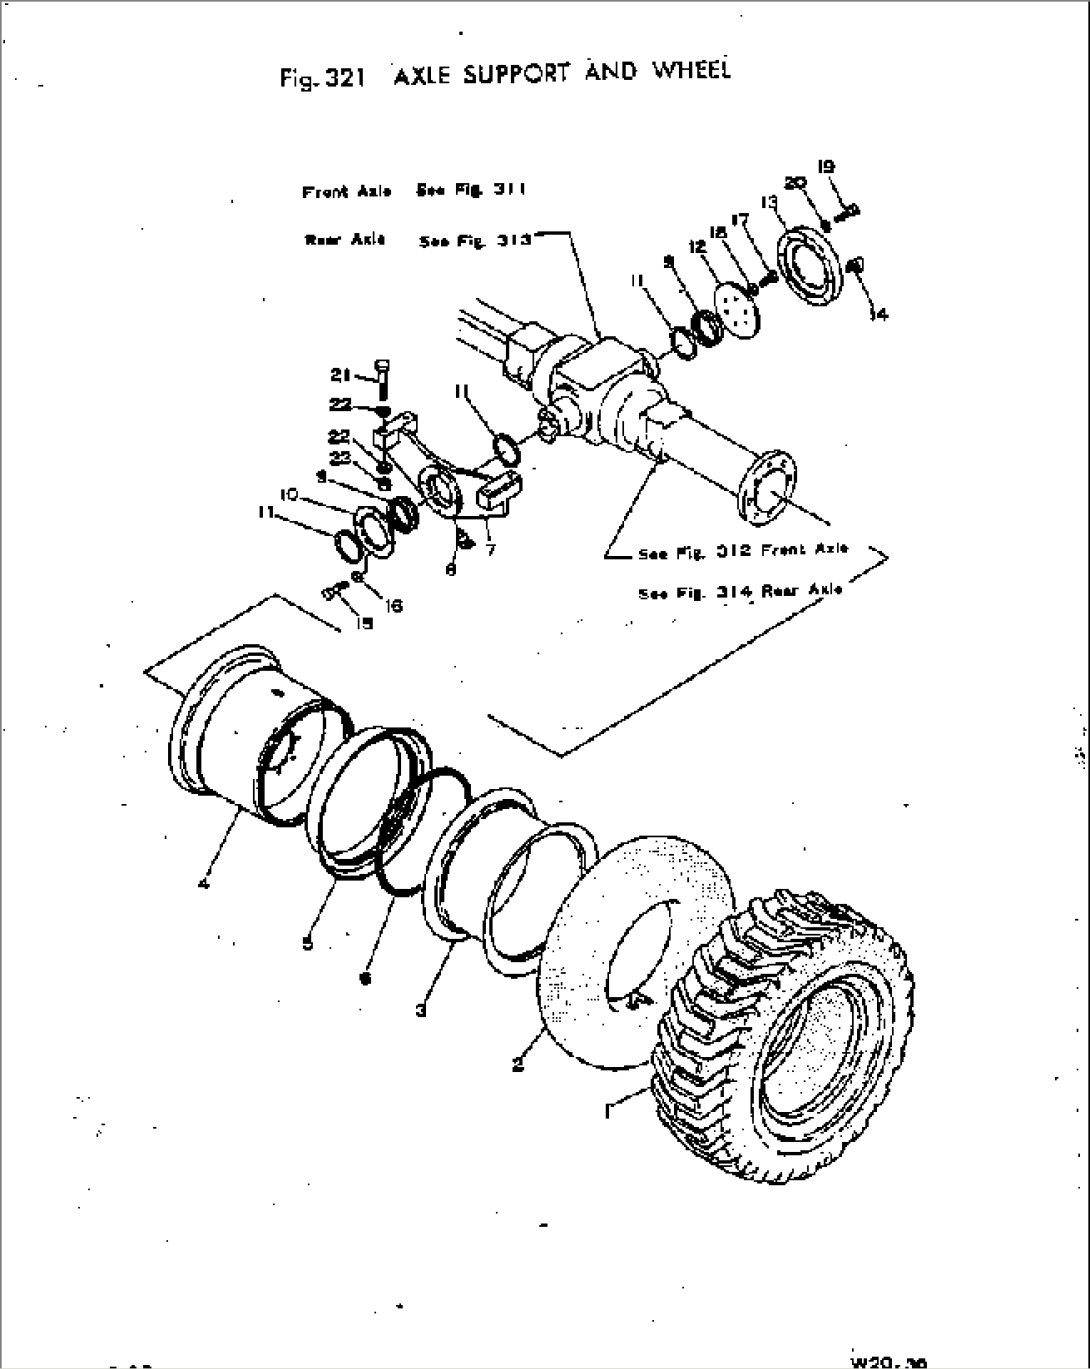 AXLE SUPPORT AND WHEEL